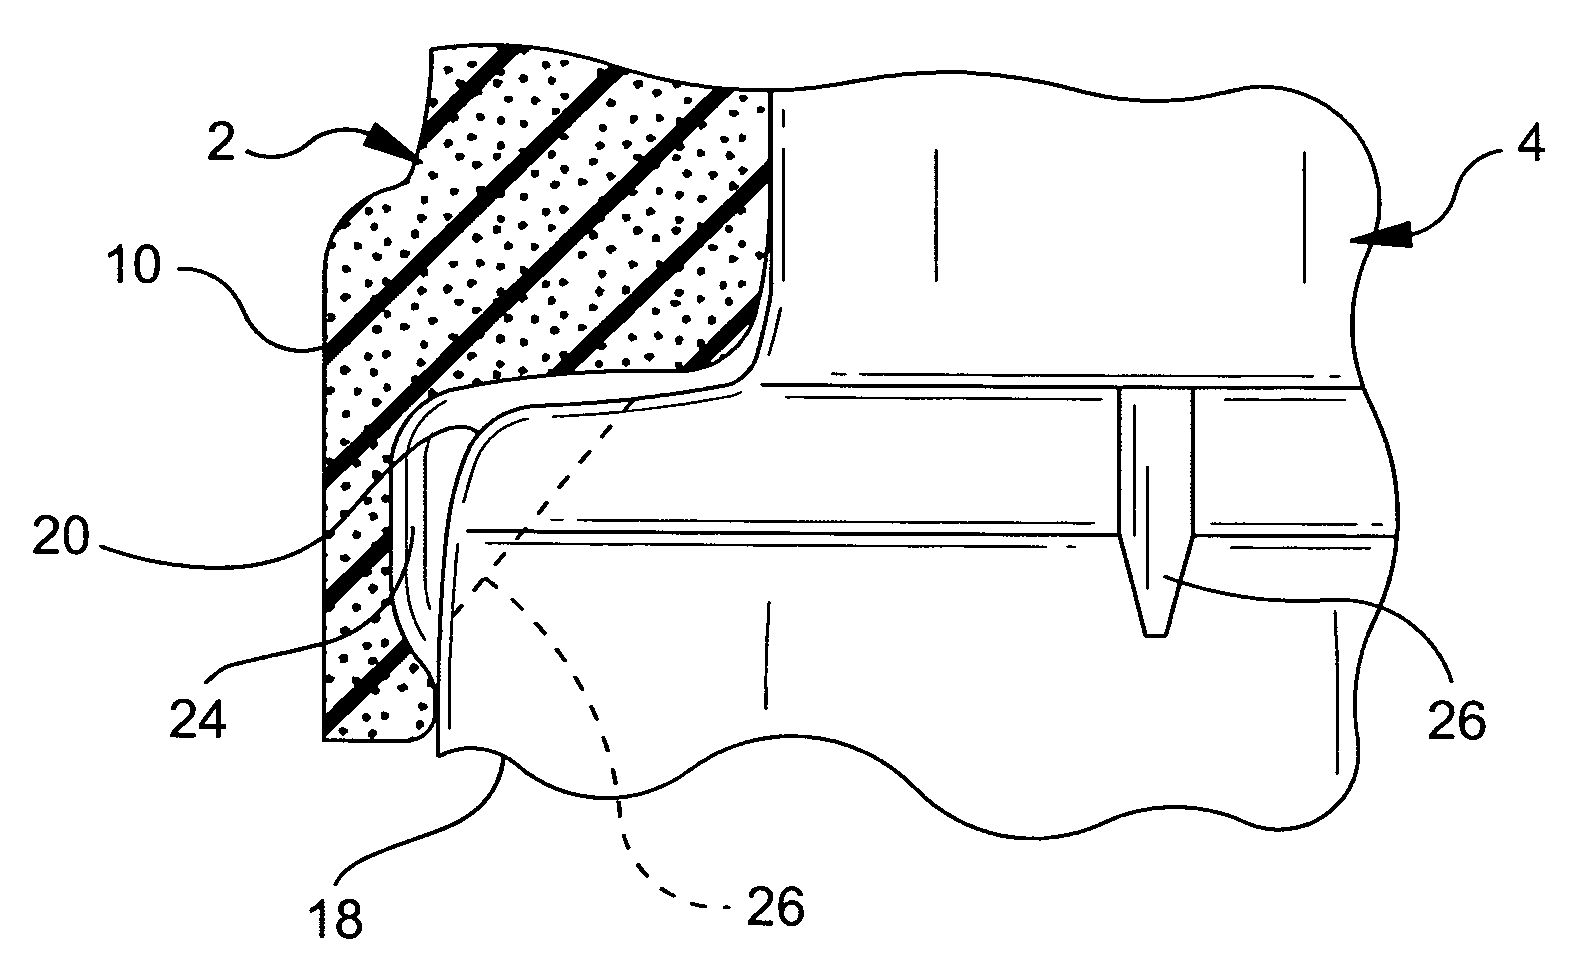 Separable electrical connector assembly